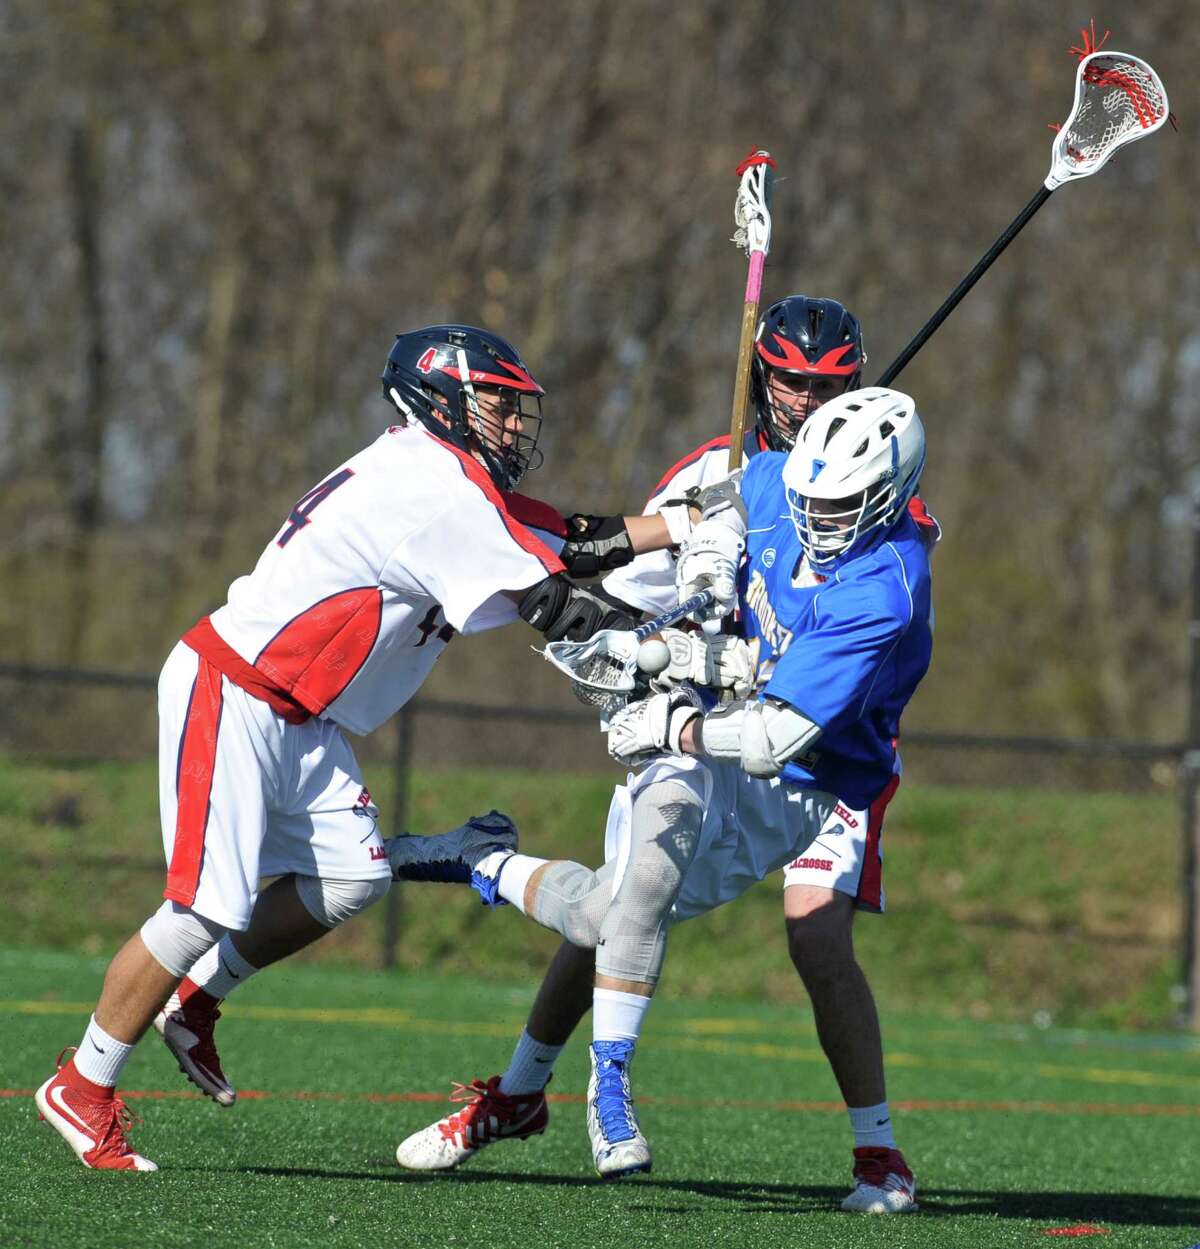 New Fairfield's Zach Buffington (44) knocks the ball loose from Brookfield's Harrison Manesis (10) in the boys lacrosse game between Brookfield and New Fairfield high schools, on Tuesday afternoon, April 19, 2016, at New Fairfield High School, in New Fairfield, Conn. New Fairfield's Fred Zering (35) is behind the play.